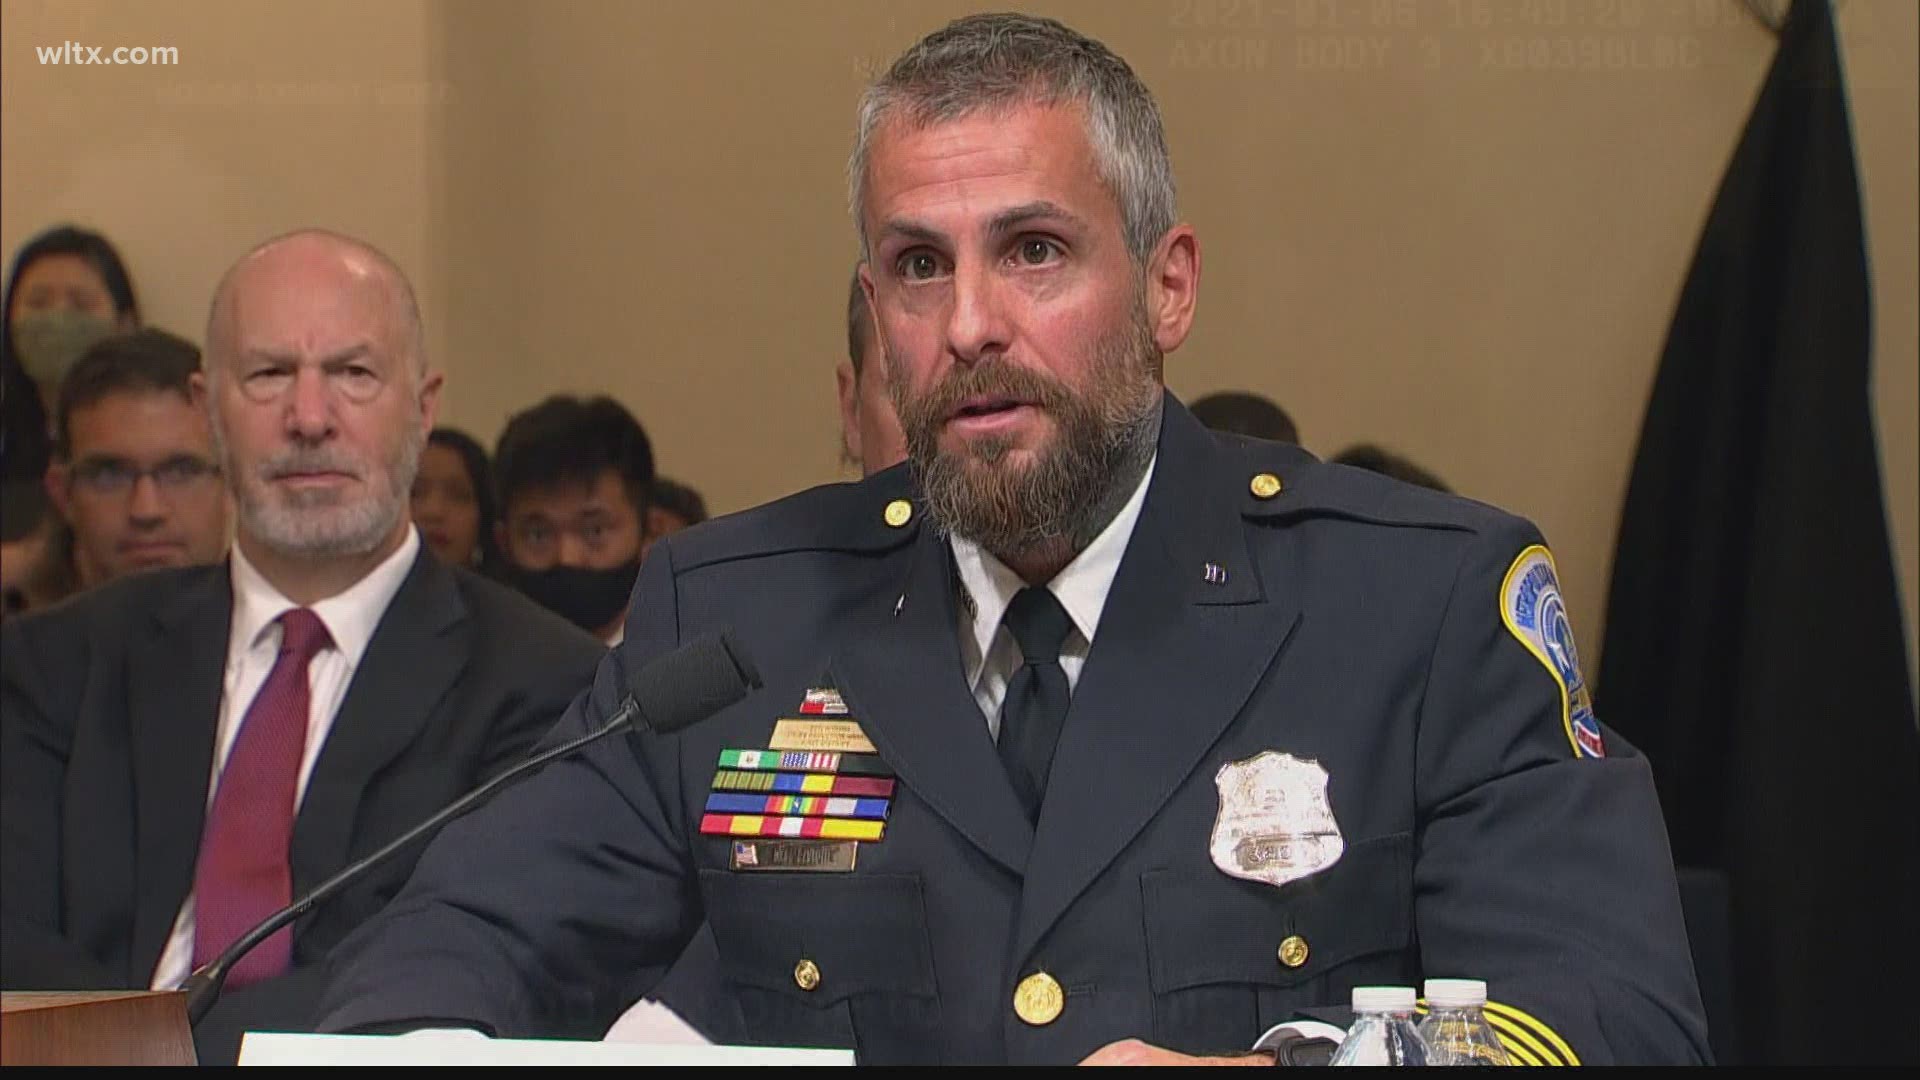 Four police officers who defended the U.S. Capitol on Jan. 6 testified before Congress, sharing their first-hand account of what happened.